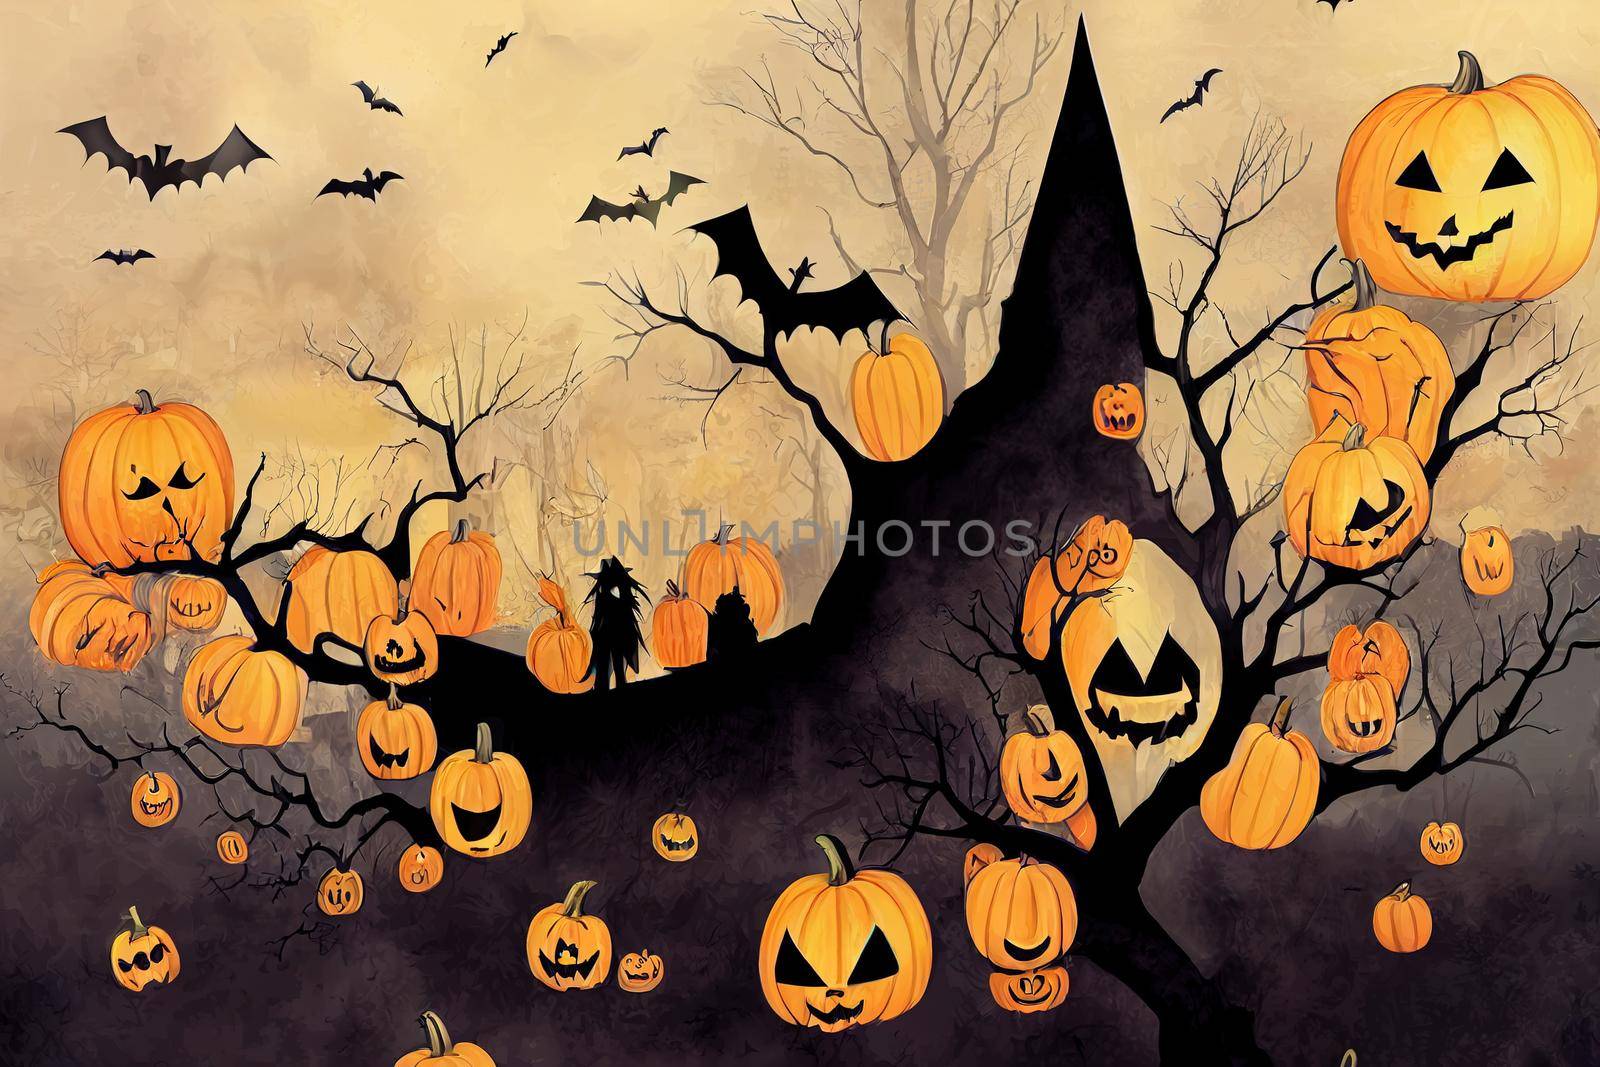 Garland Designs and Illustrations for Halloween ,toon style, anime style v3